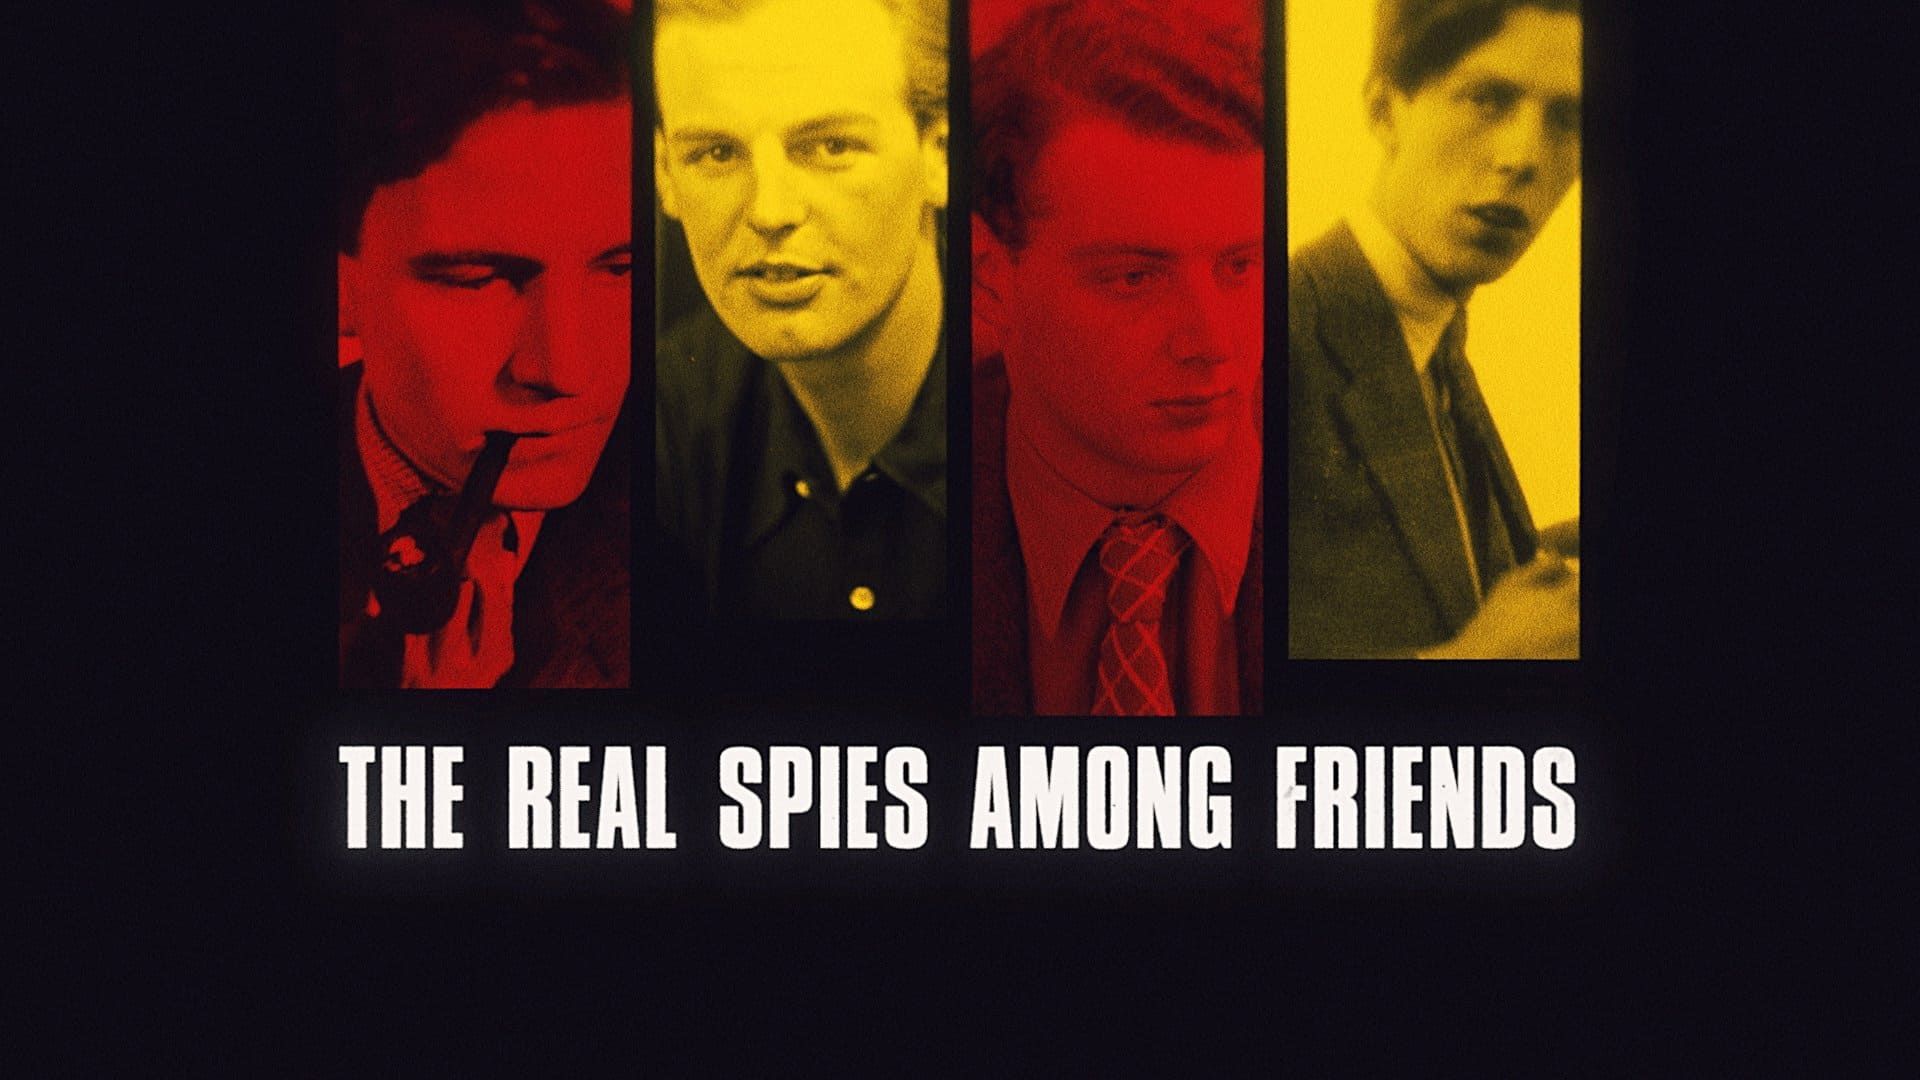 The Real Spies Among Friends background